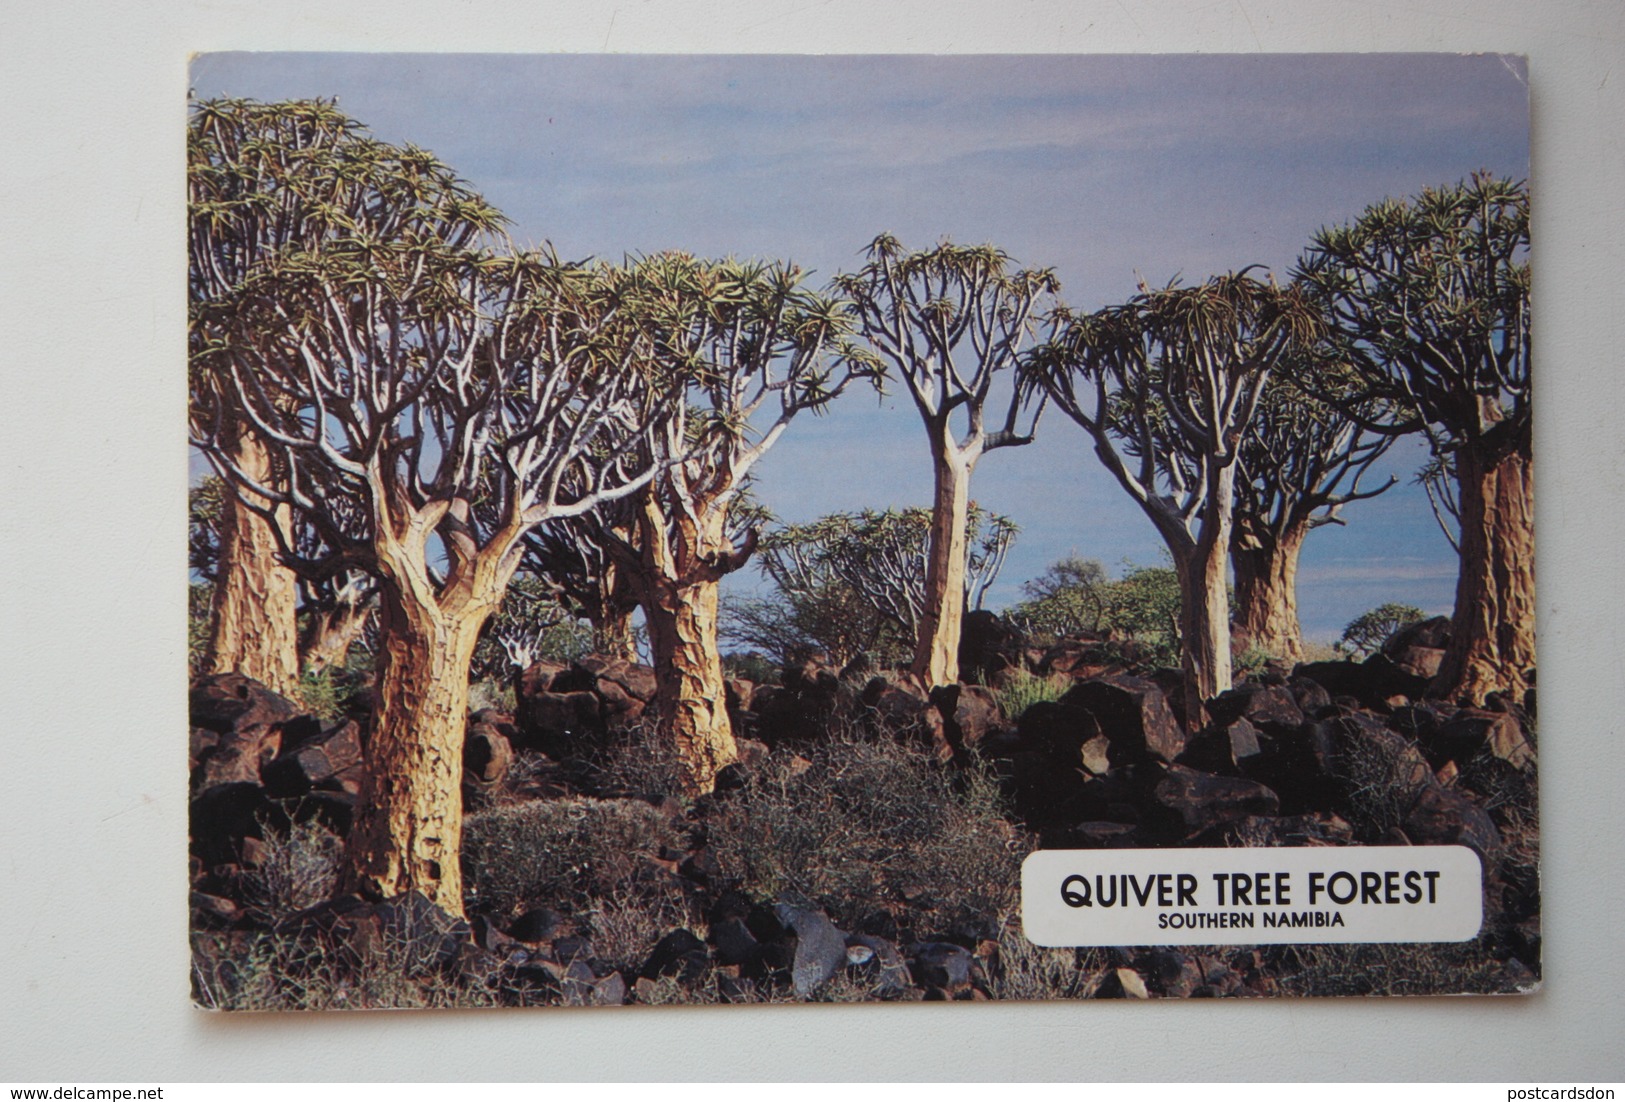 AFRICA-NAMIBIA: QUIVER TREE FOREST. SOUTHERN NAMIBIA - Old Postcard - Uganda Stamp - Namibie